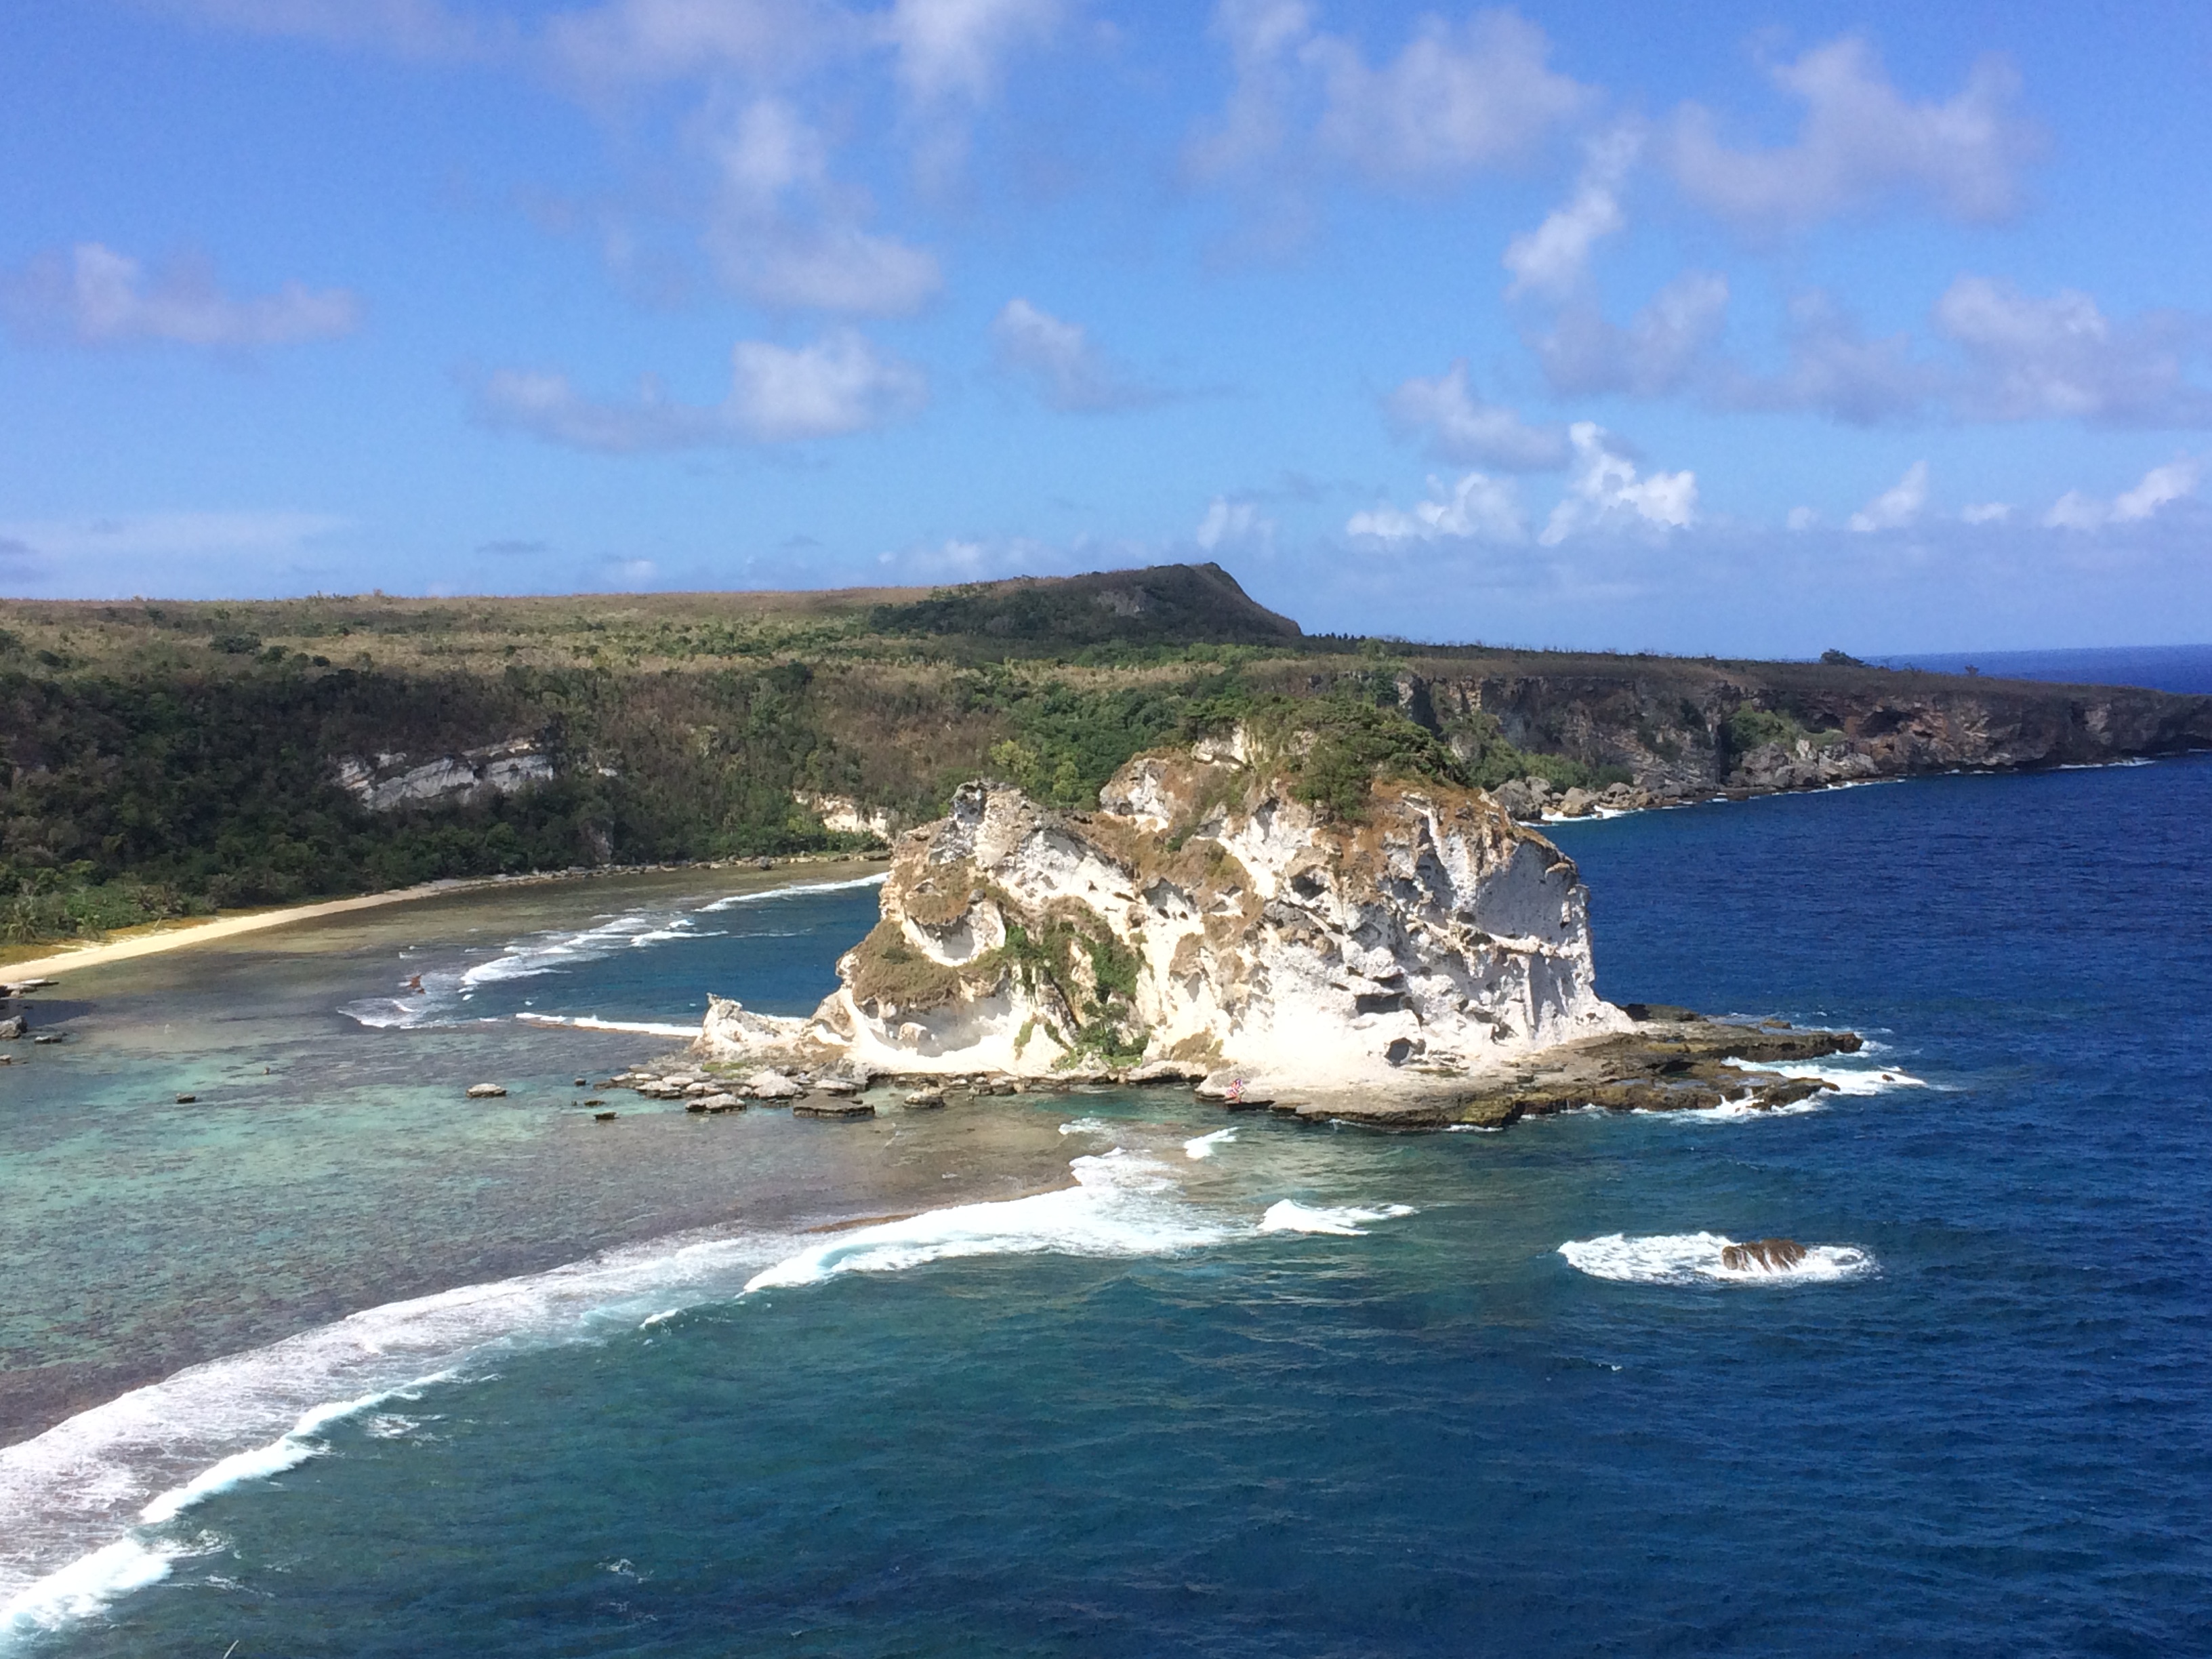 View of the Marianas Islands